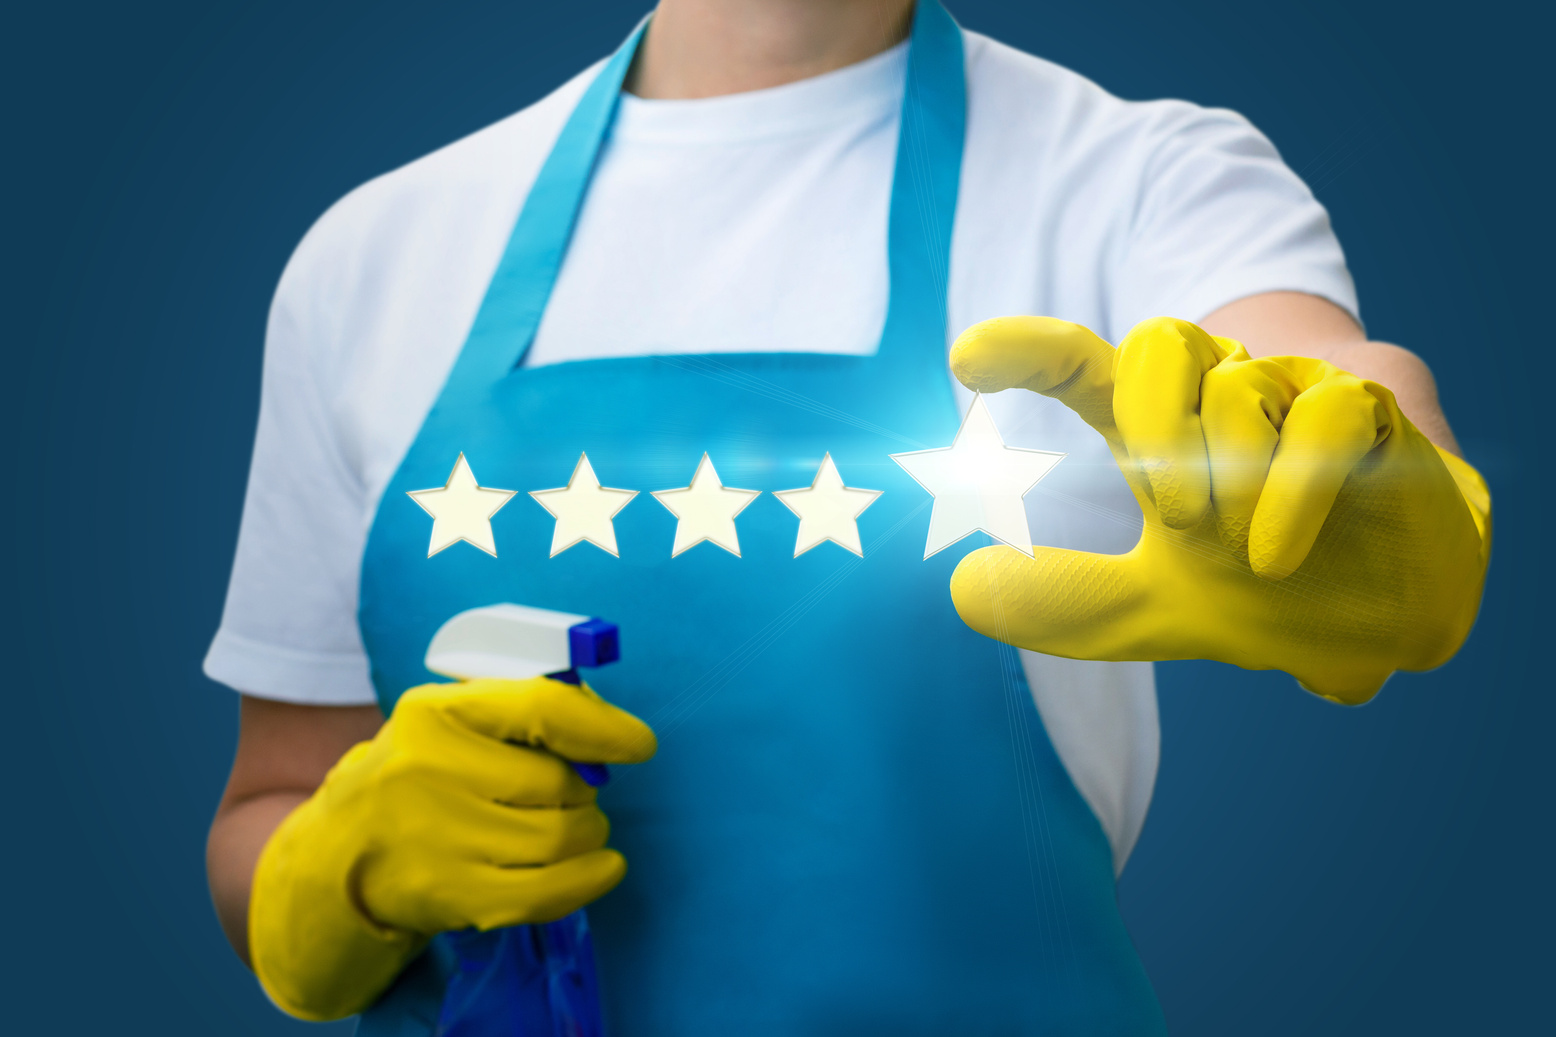 Cleaning lady shows the fifth star .